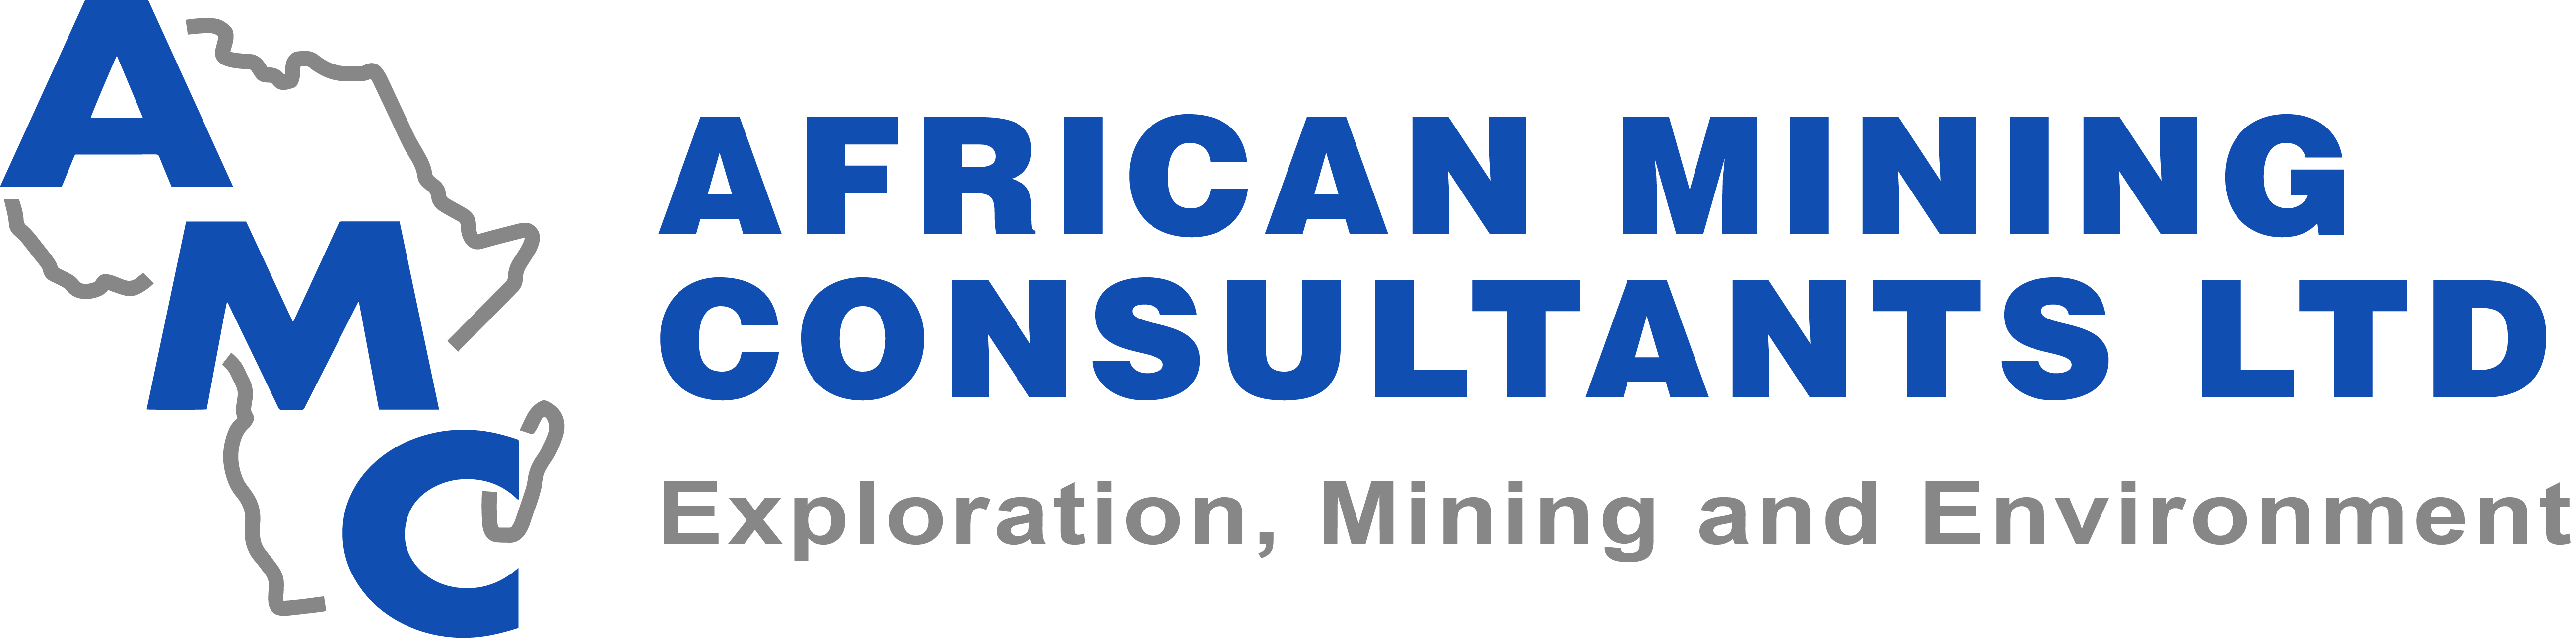 African Mining Consultants